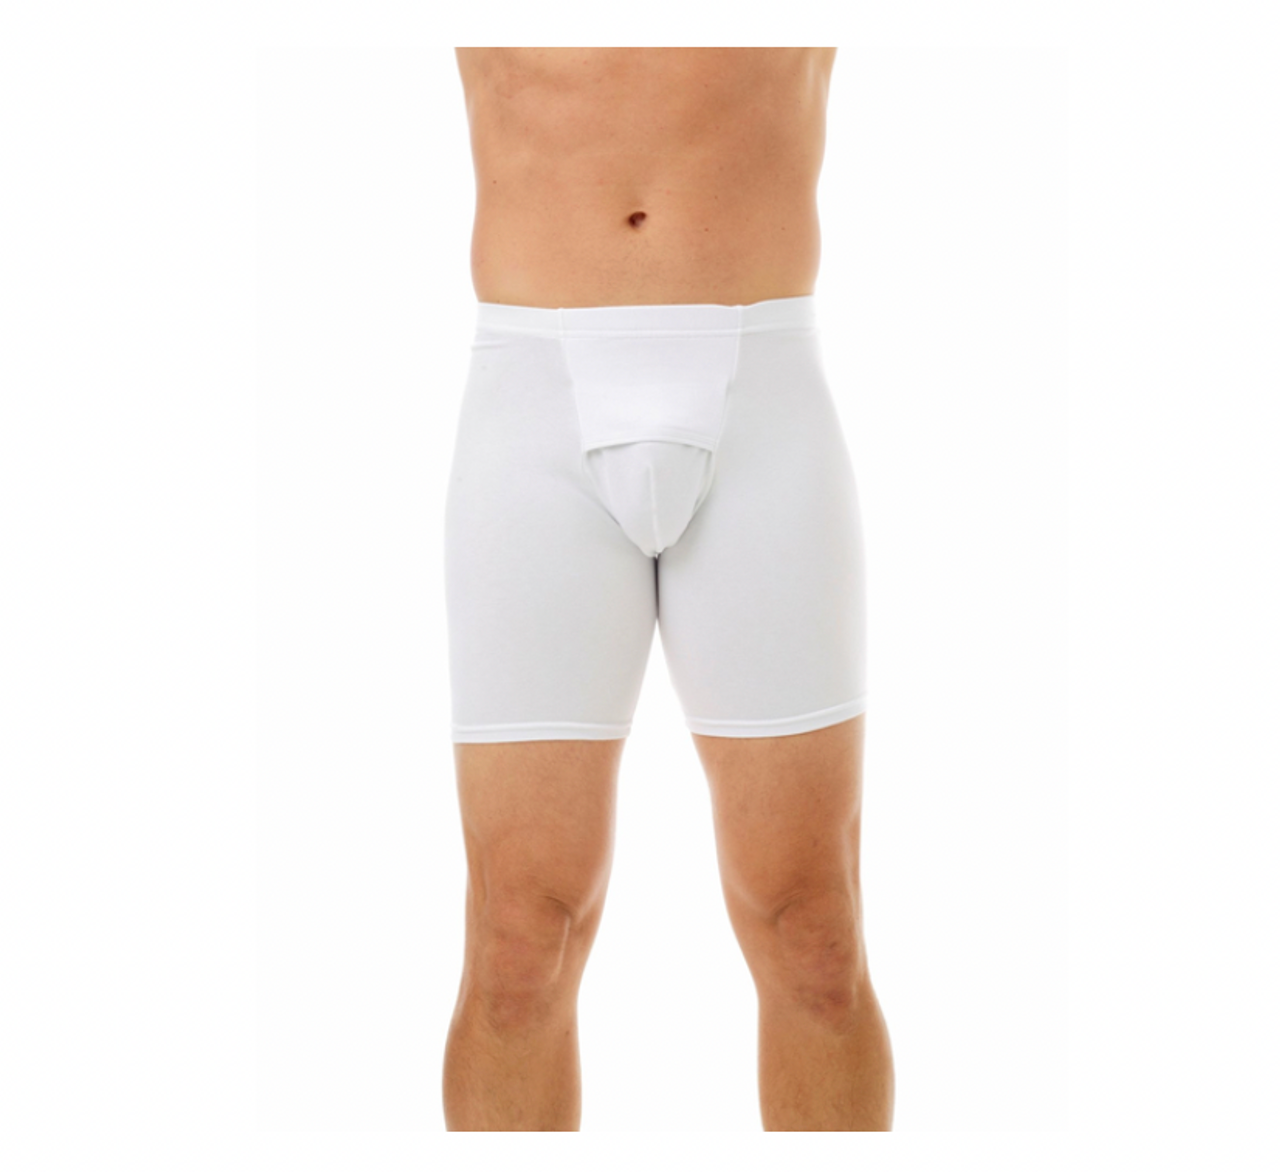 Men's Cotton Spandex and Inguinal Hernia prevention boxer underwear(Large  37-40) - B&F Medical Supplies.com